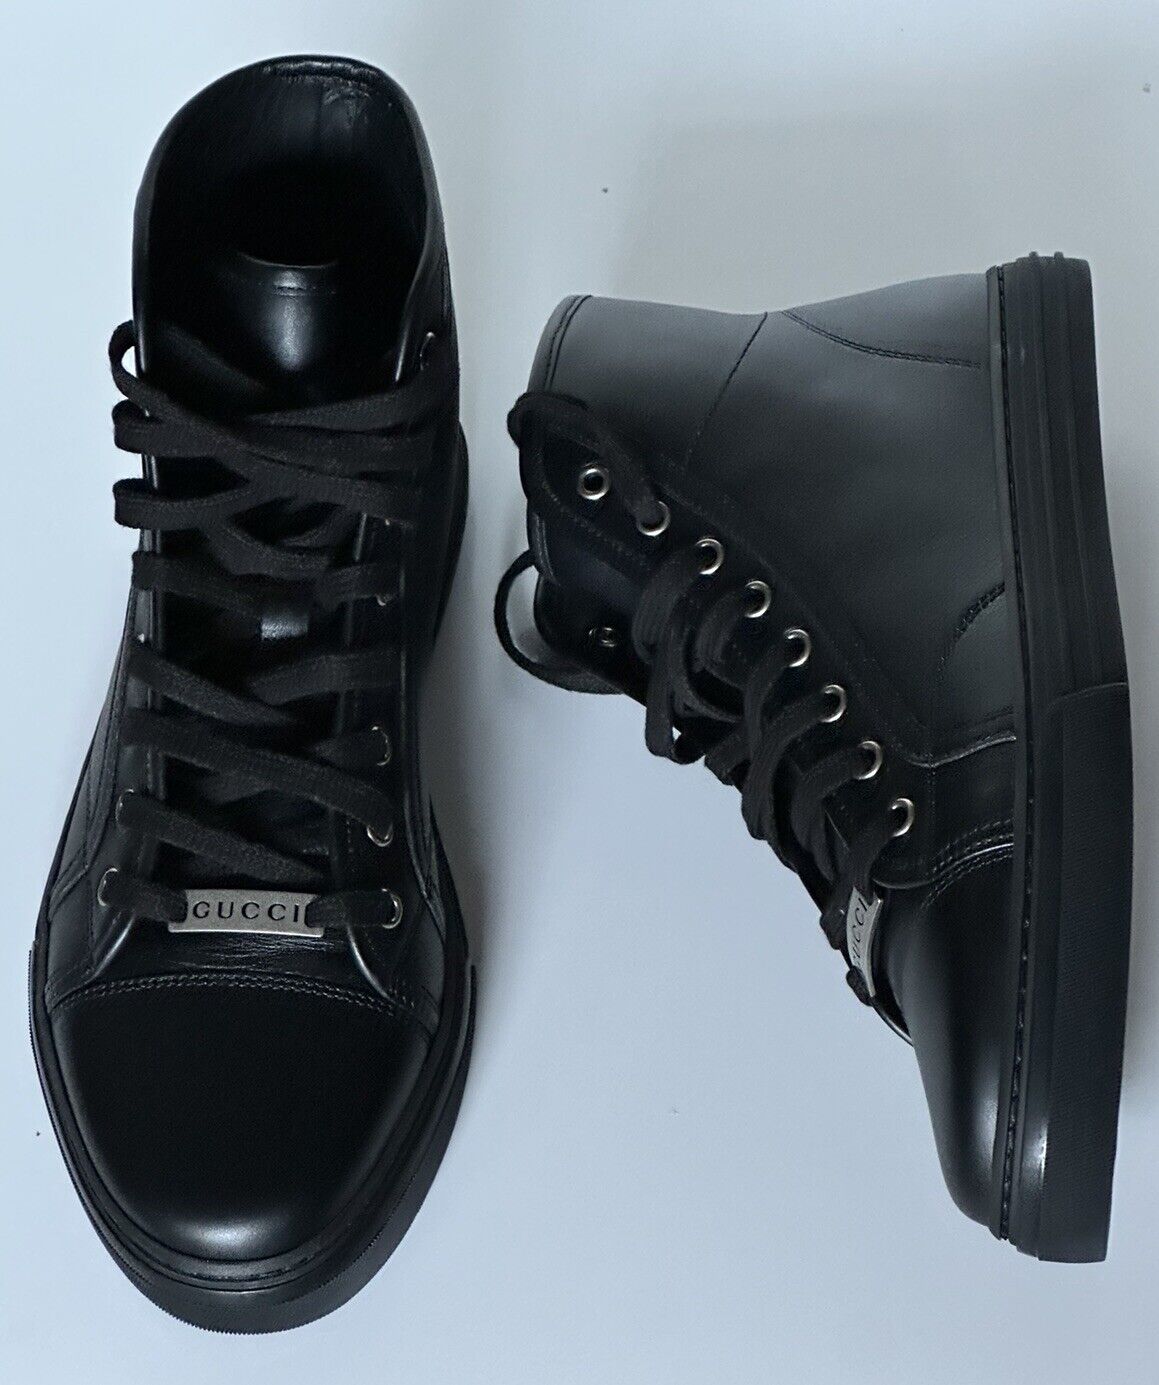 NIB Gucci Leather Black High-top Sneakers 7.5 US (Gucci 7G) 423300 IT